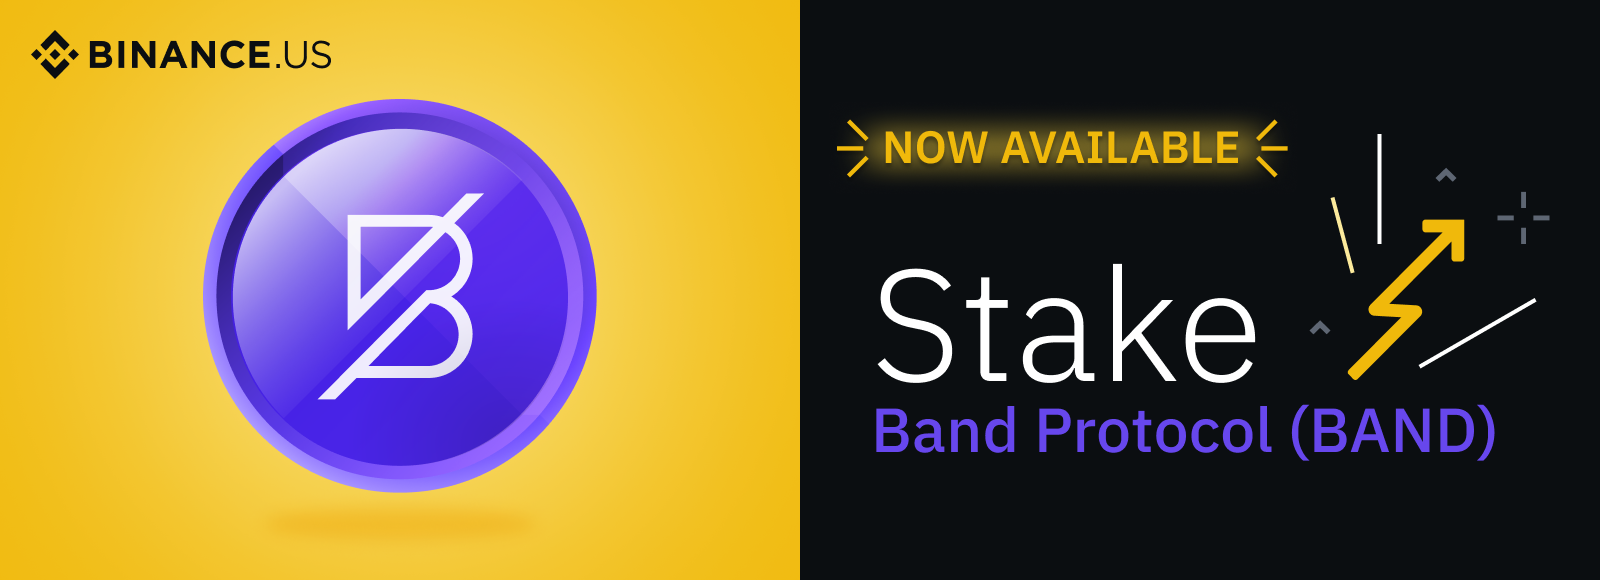 StakingLaunch_BAND-Announcement_1600X580.png